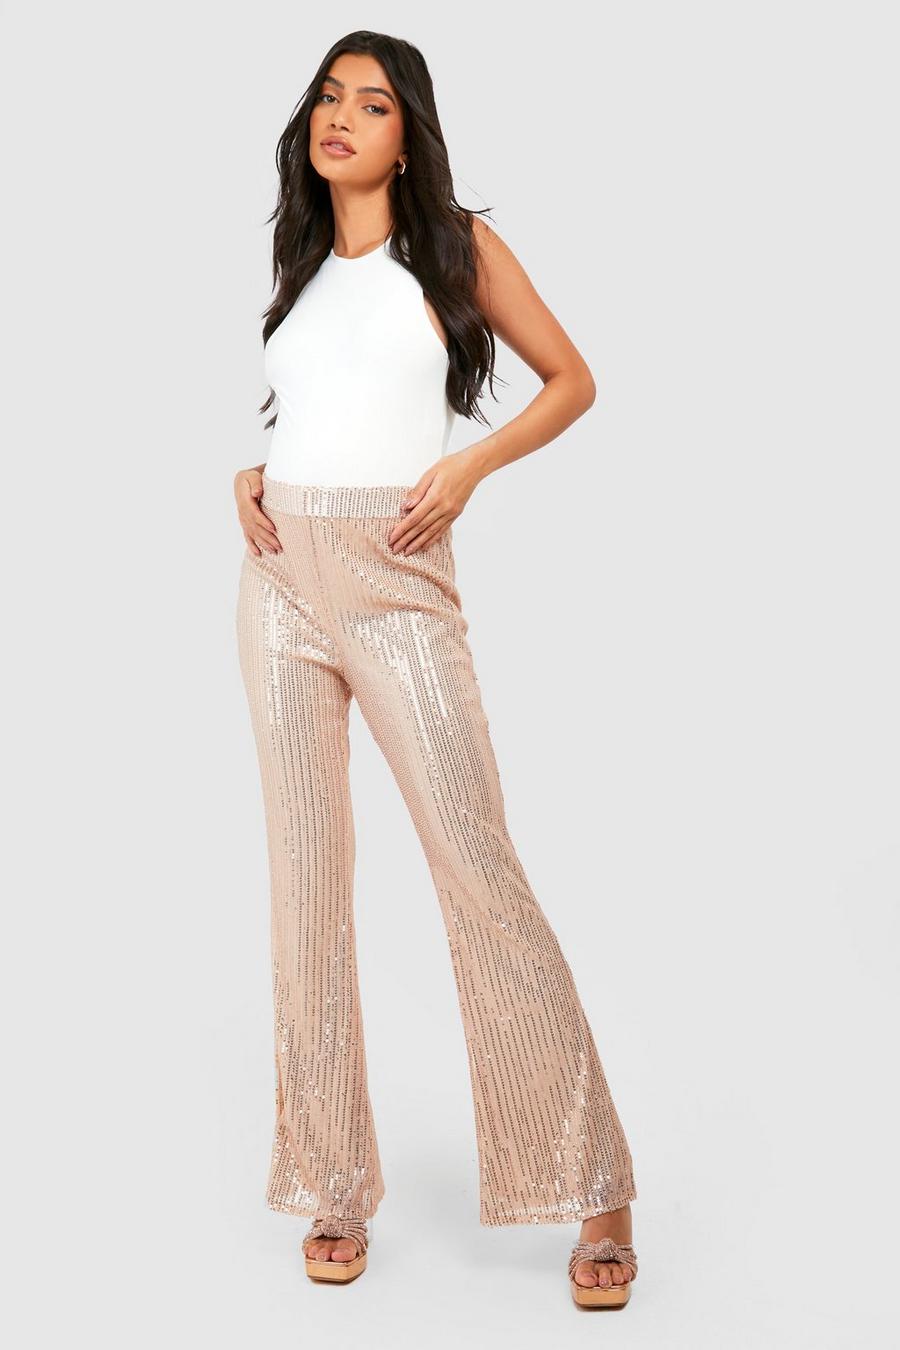 Maternity Bell Bottom Flare Pants Outfit